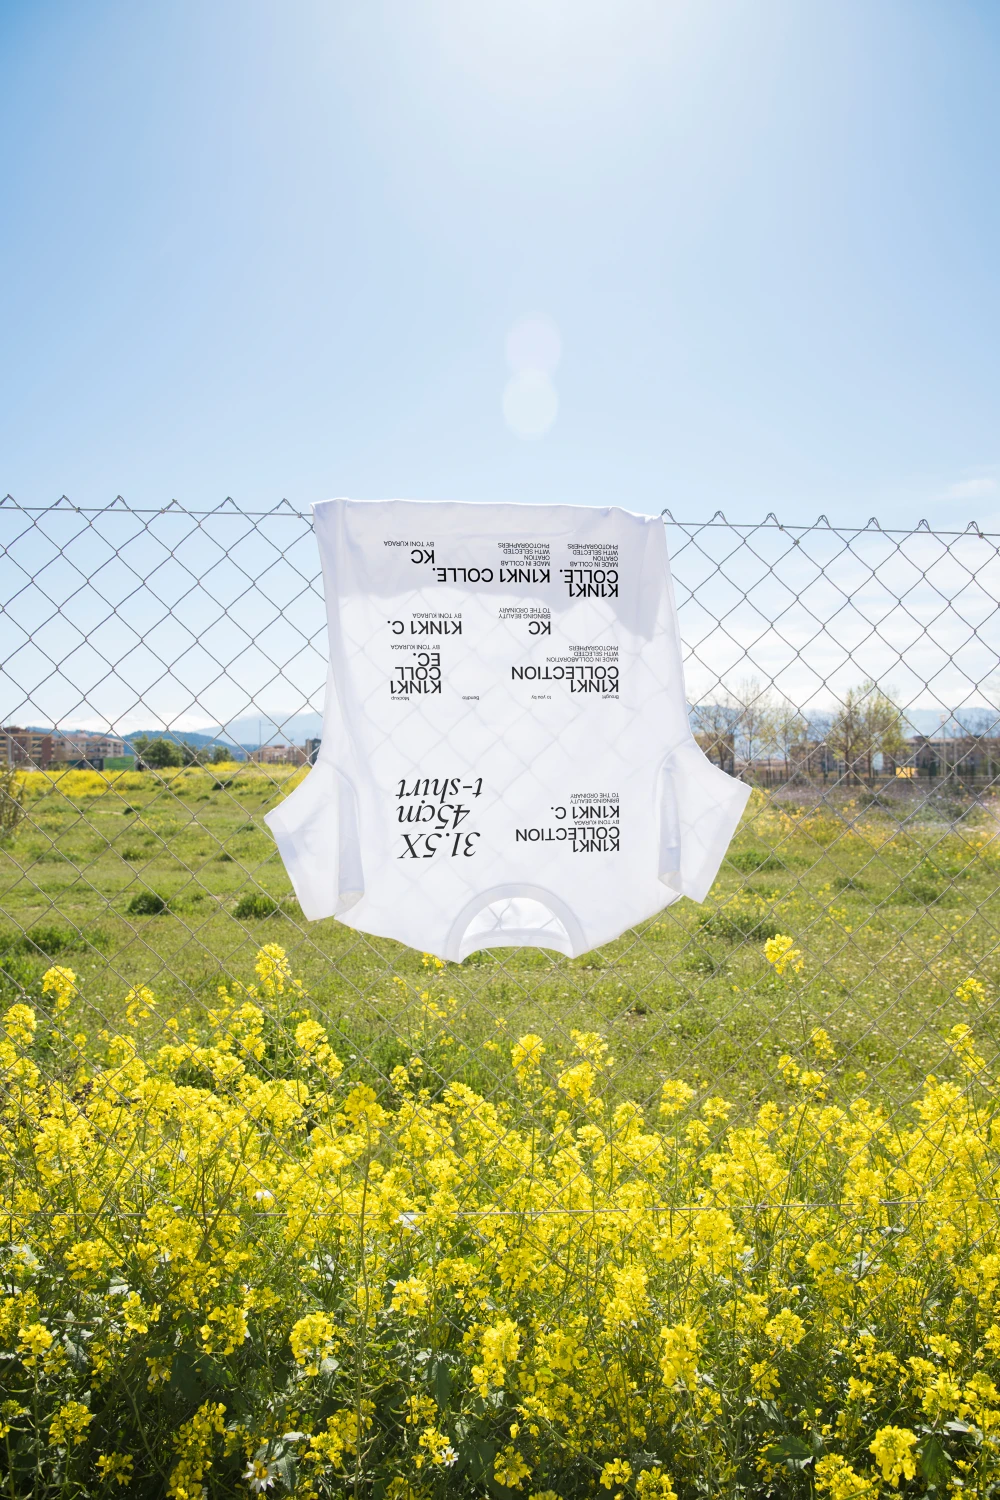 Urban t-shirt mockup hanging in a fence in the midst of a flower field.